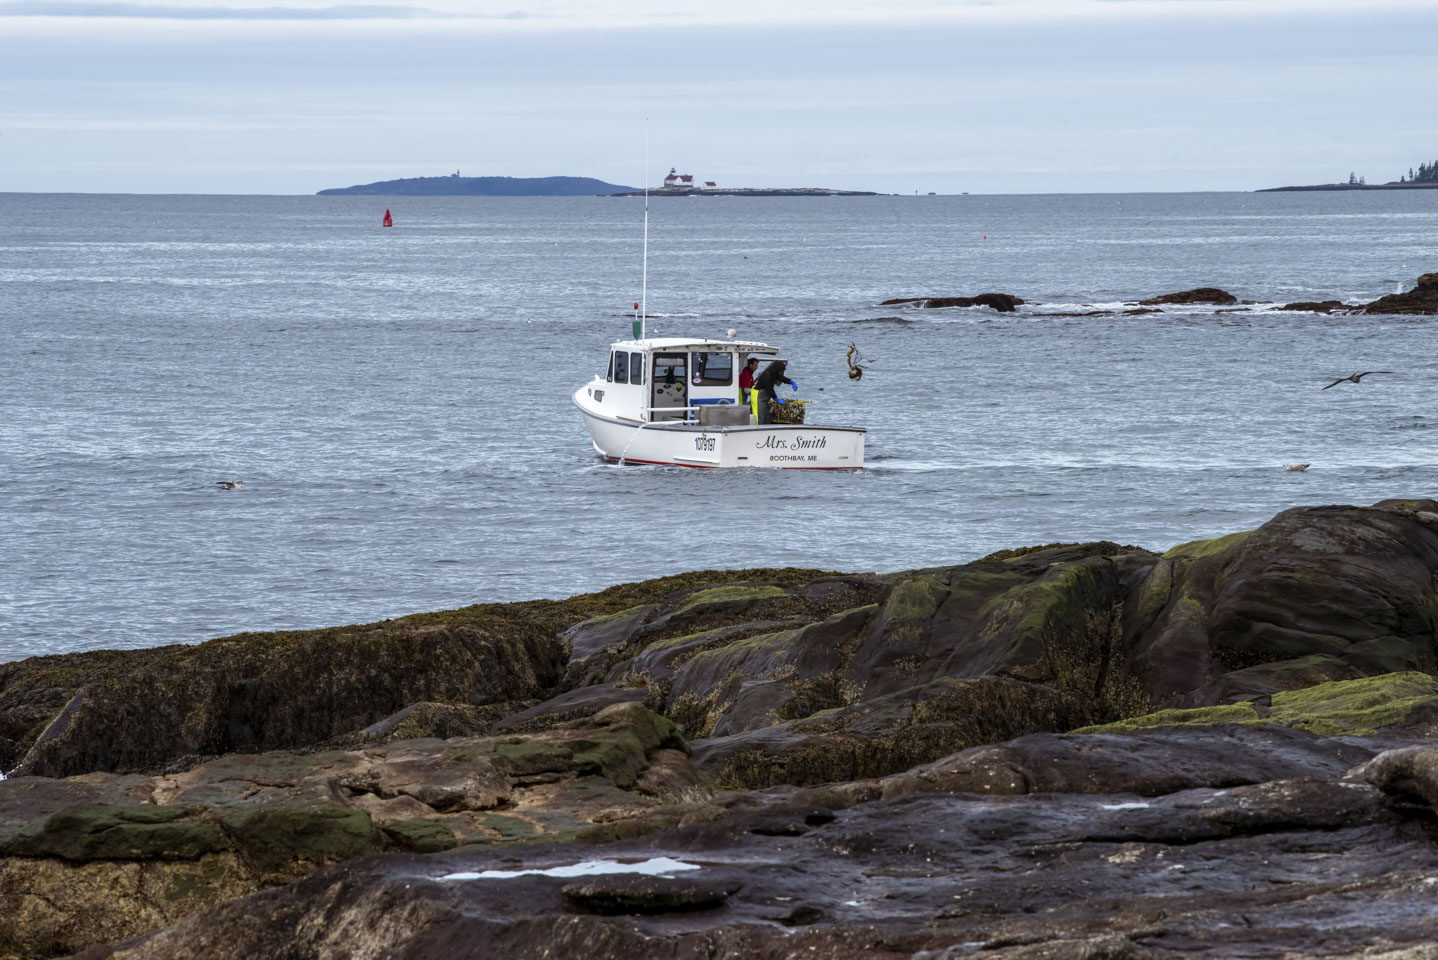 The lobster boat Mrs. Smith with Cuckold and Seguin lighthouses in the distance